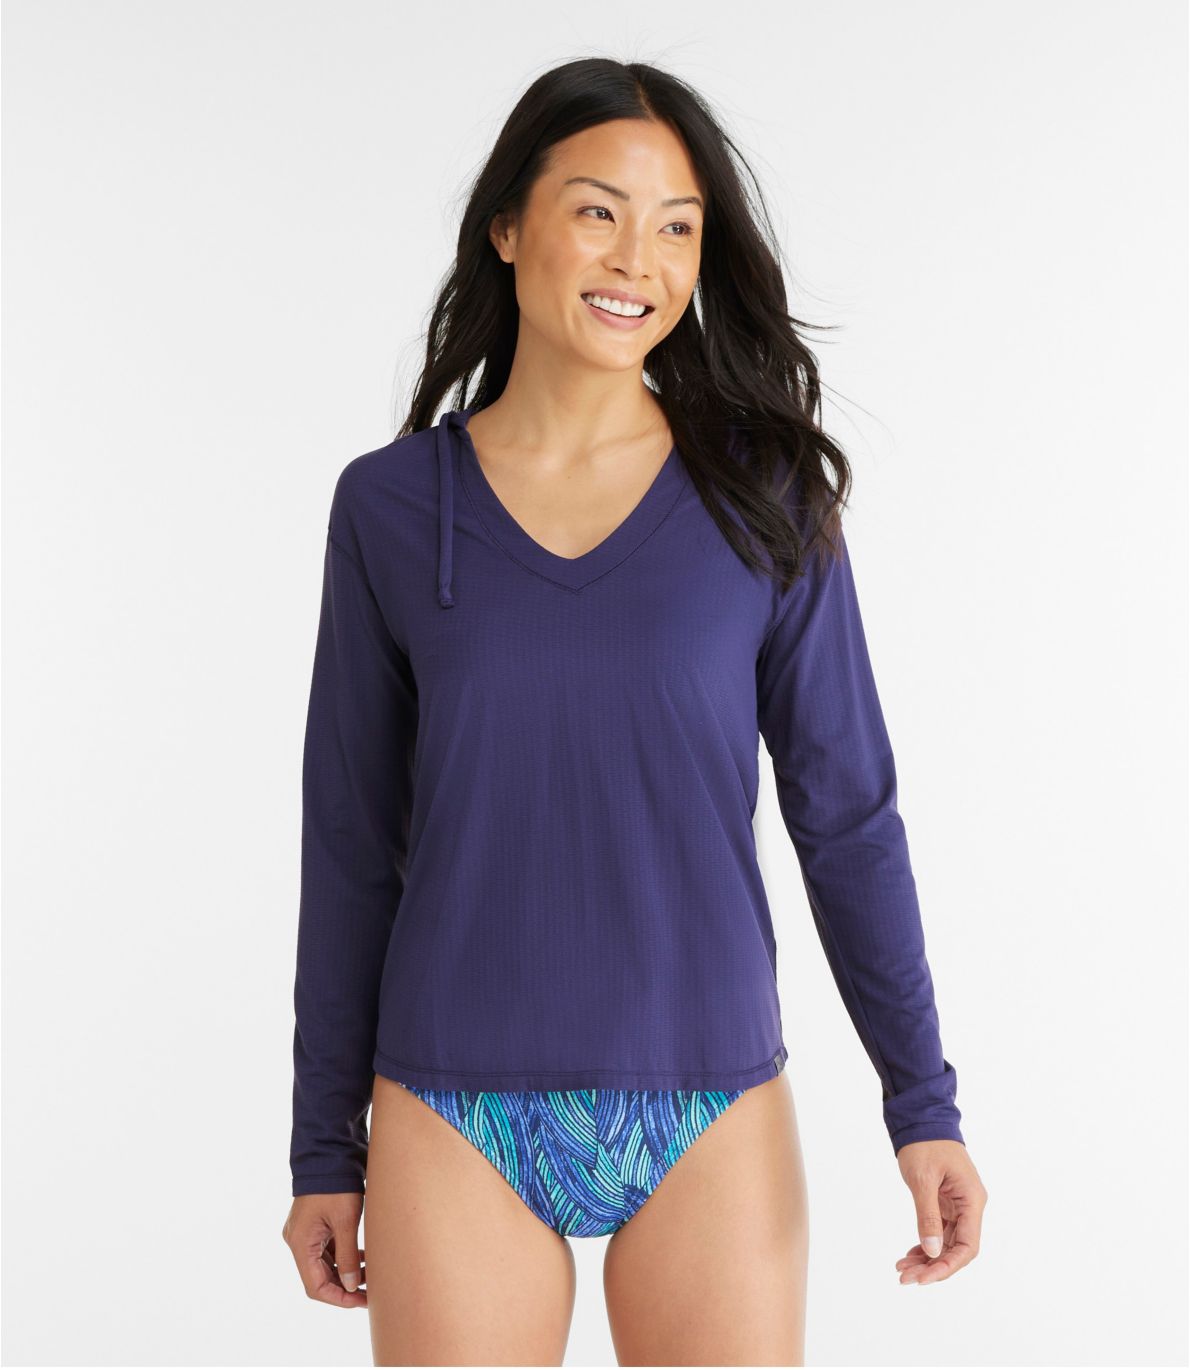 Women's Sand Beach Cover-Up, Hooded Pullover